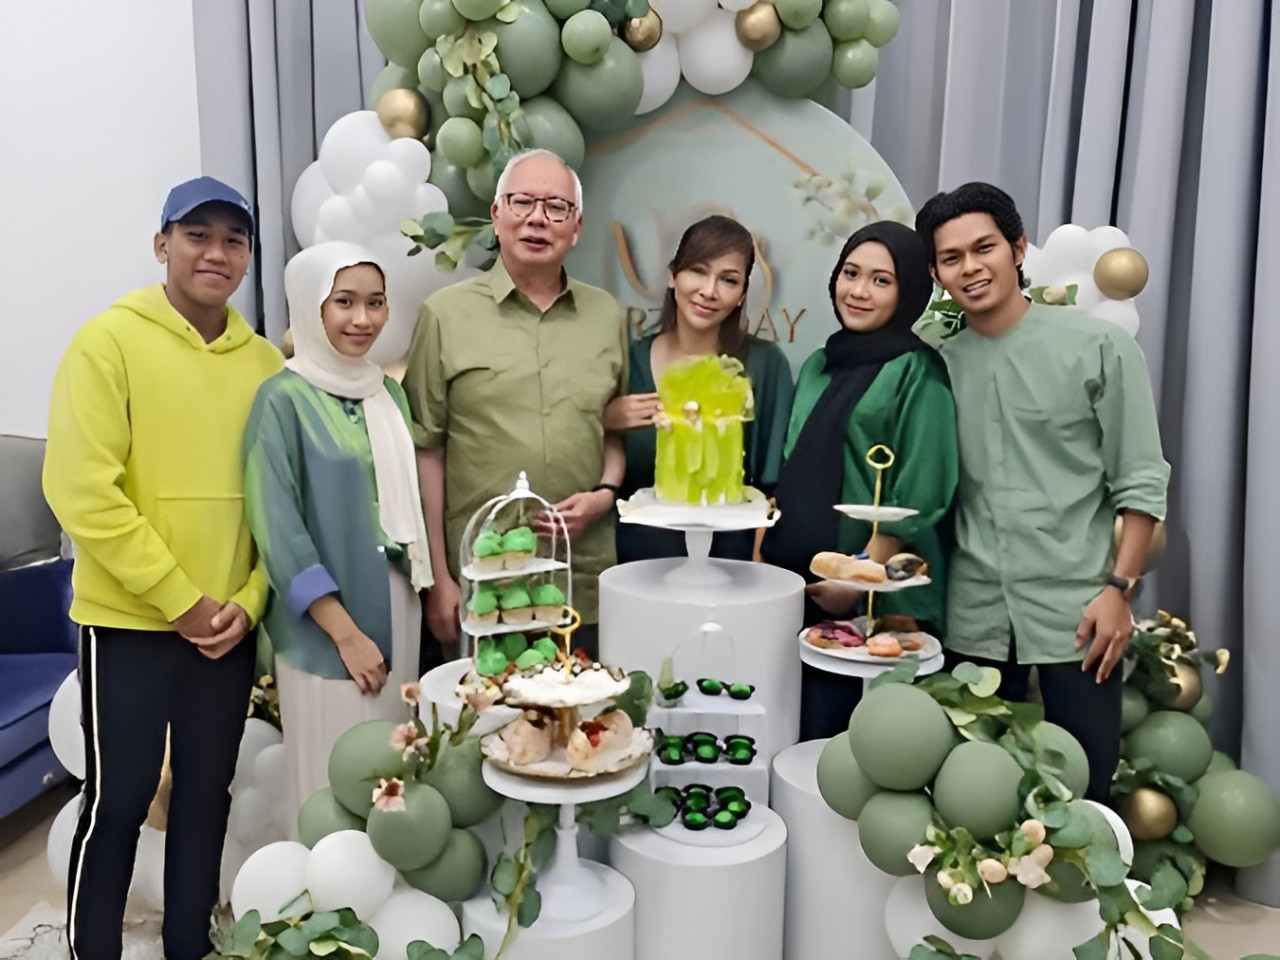 An alleged ‘family photograph’ showing Datuk Seri Najib Razak (third from left) and Hashimah Ramli (third from right) popped up on social media this week, causing speculations to rise about the relationship between the politician and the woman. – Berita Semasa Facebook pic, May 20, 2022